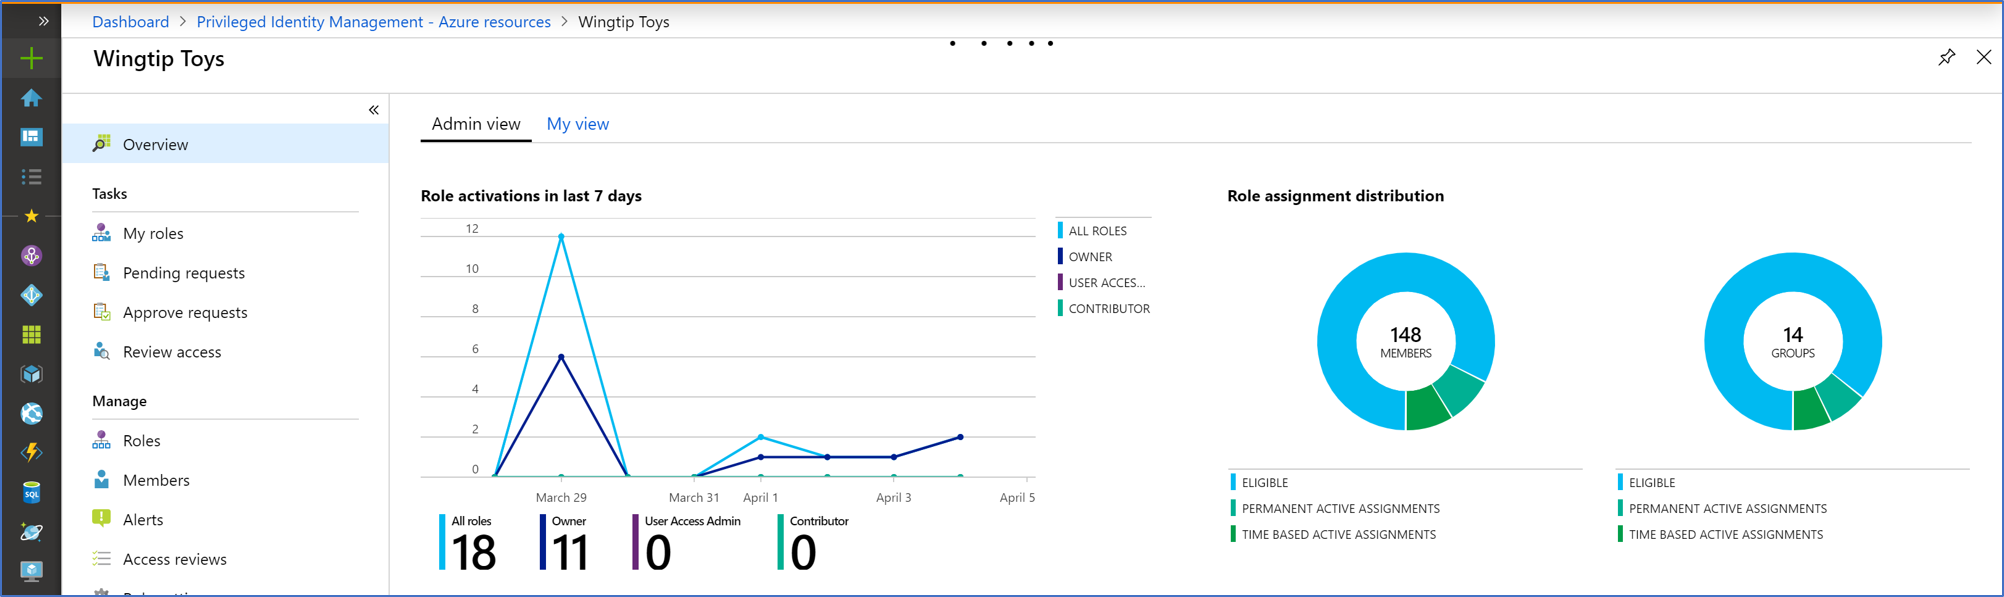 Screenshot of the Admin View dashboard, showing graphs and charts.